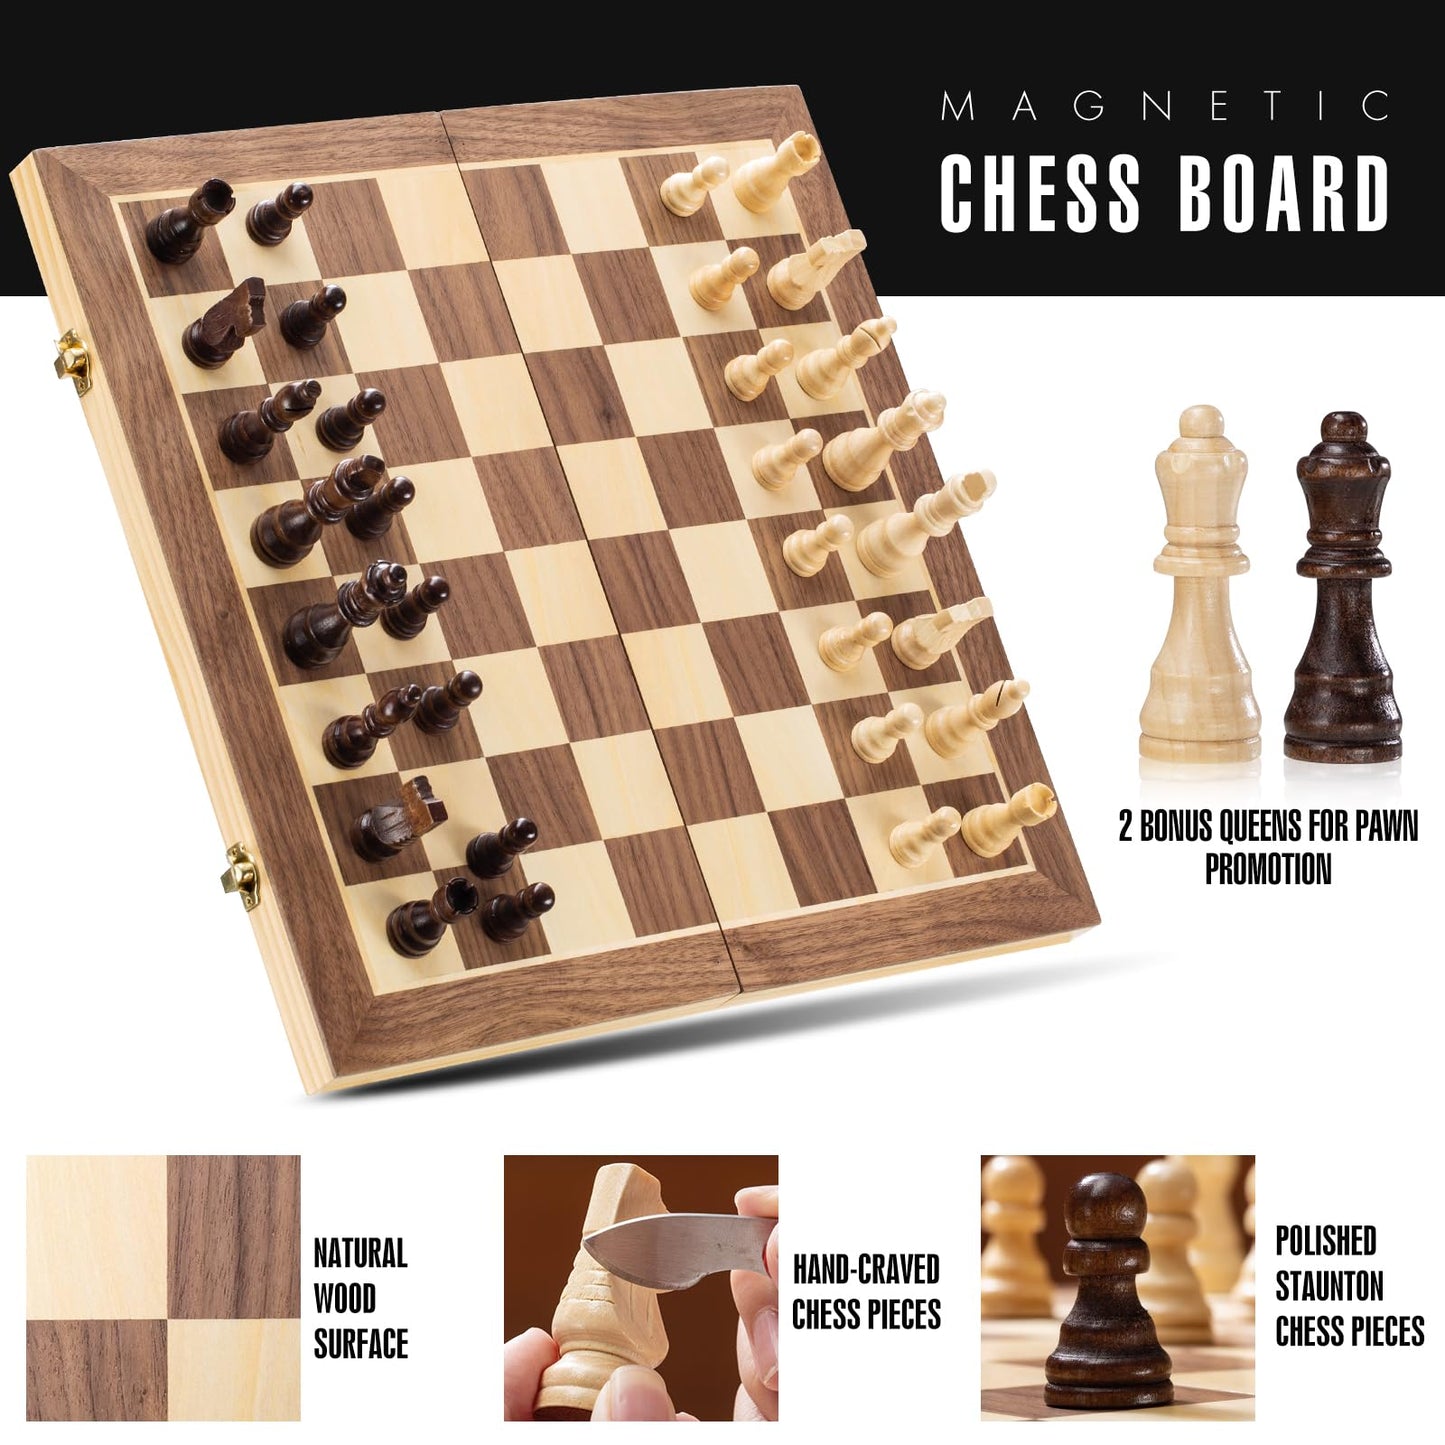 ASNEY Upgraded Magnetic Chess Set, 15" Tournament Staunton Wooden Chess Board Game Set with Magnets, Crafted Chesspiece ans Storage Slots for Kids Adult, Includes Extra Queens